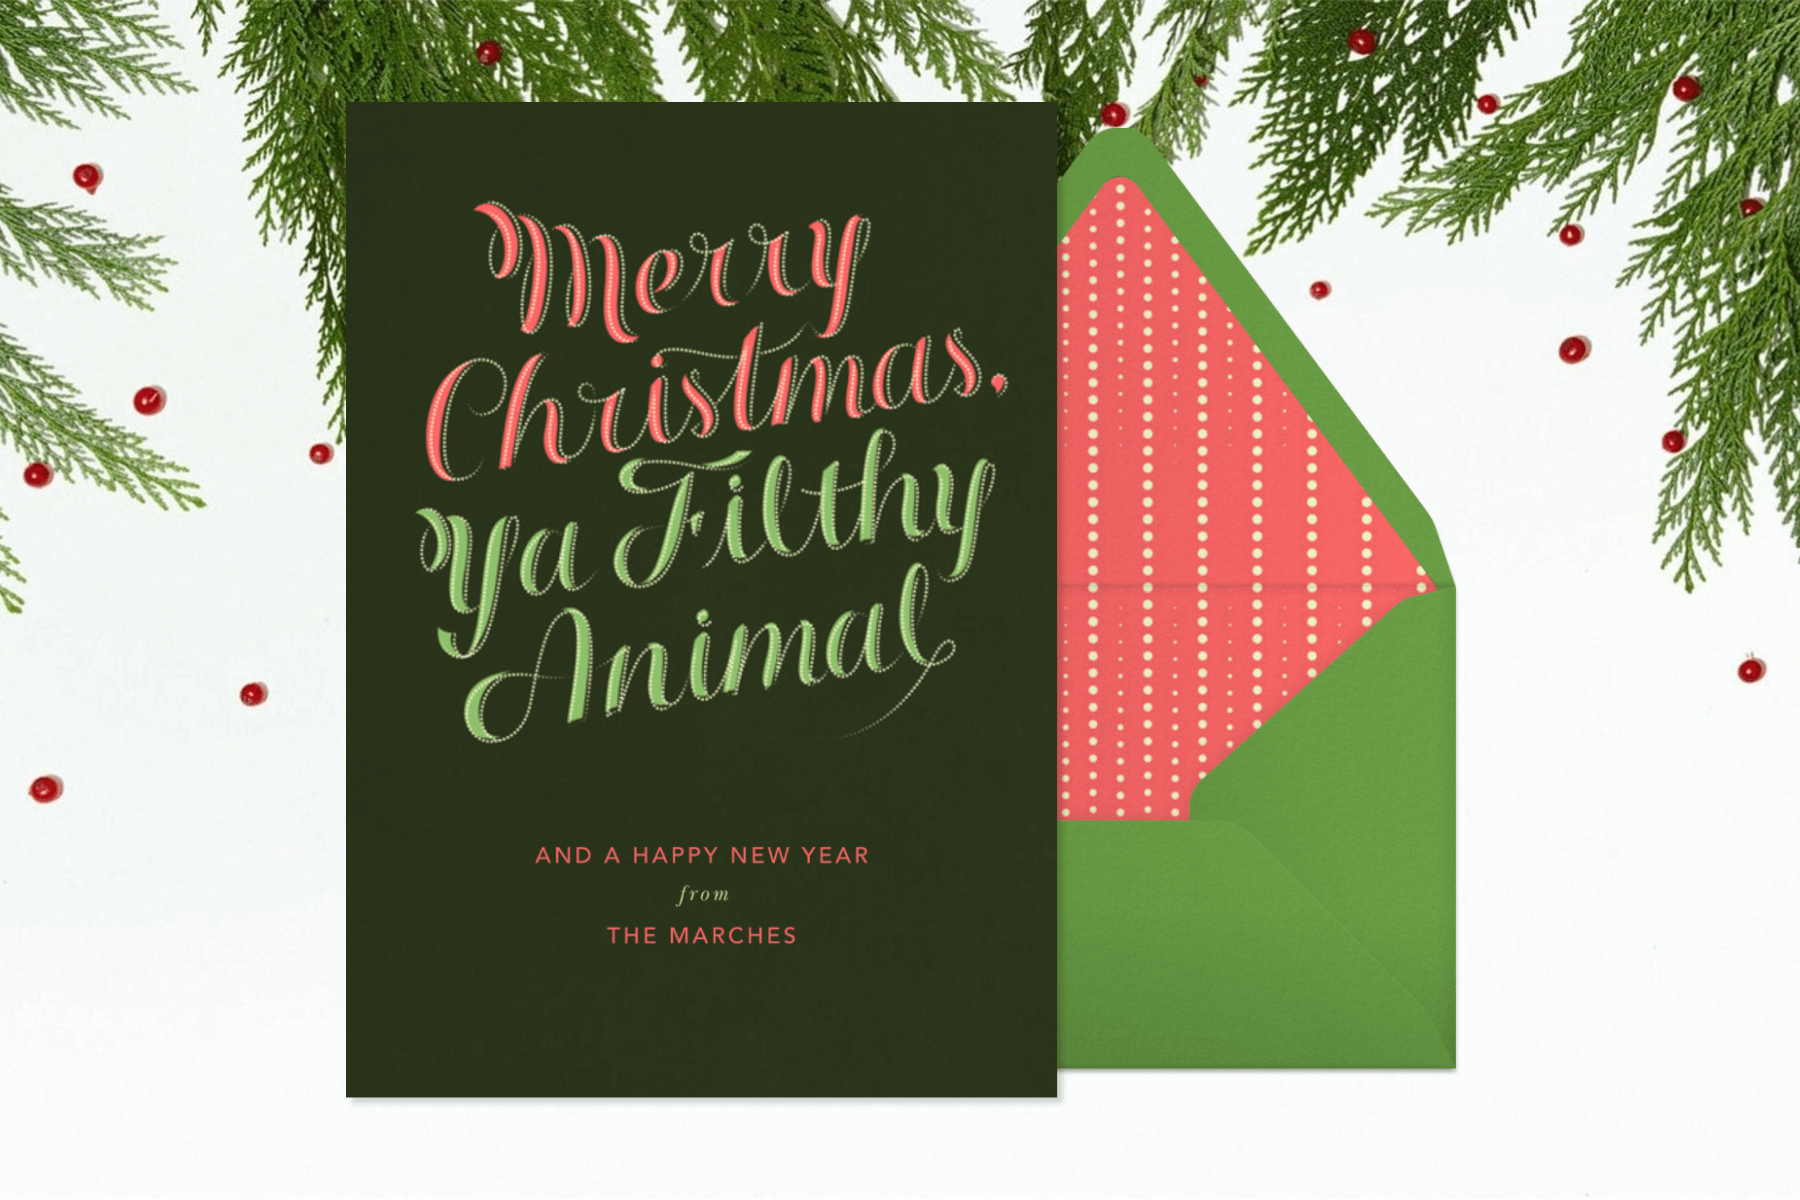 A card reads “Merry Chrisymas, ya filthy animal” in red and green.